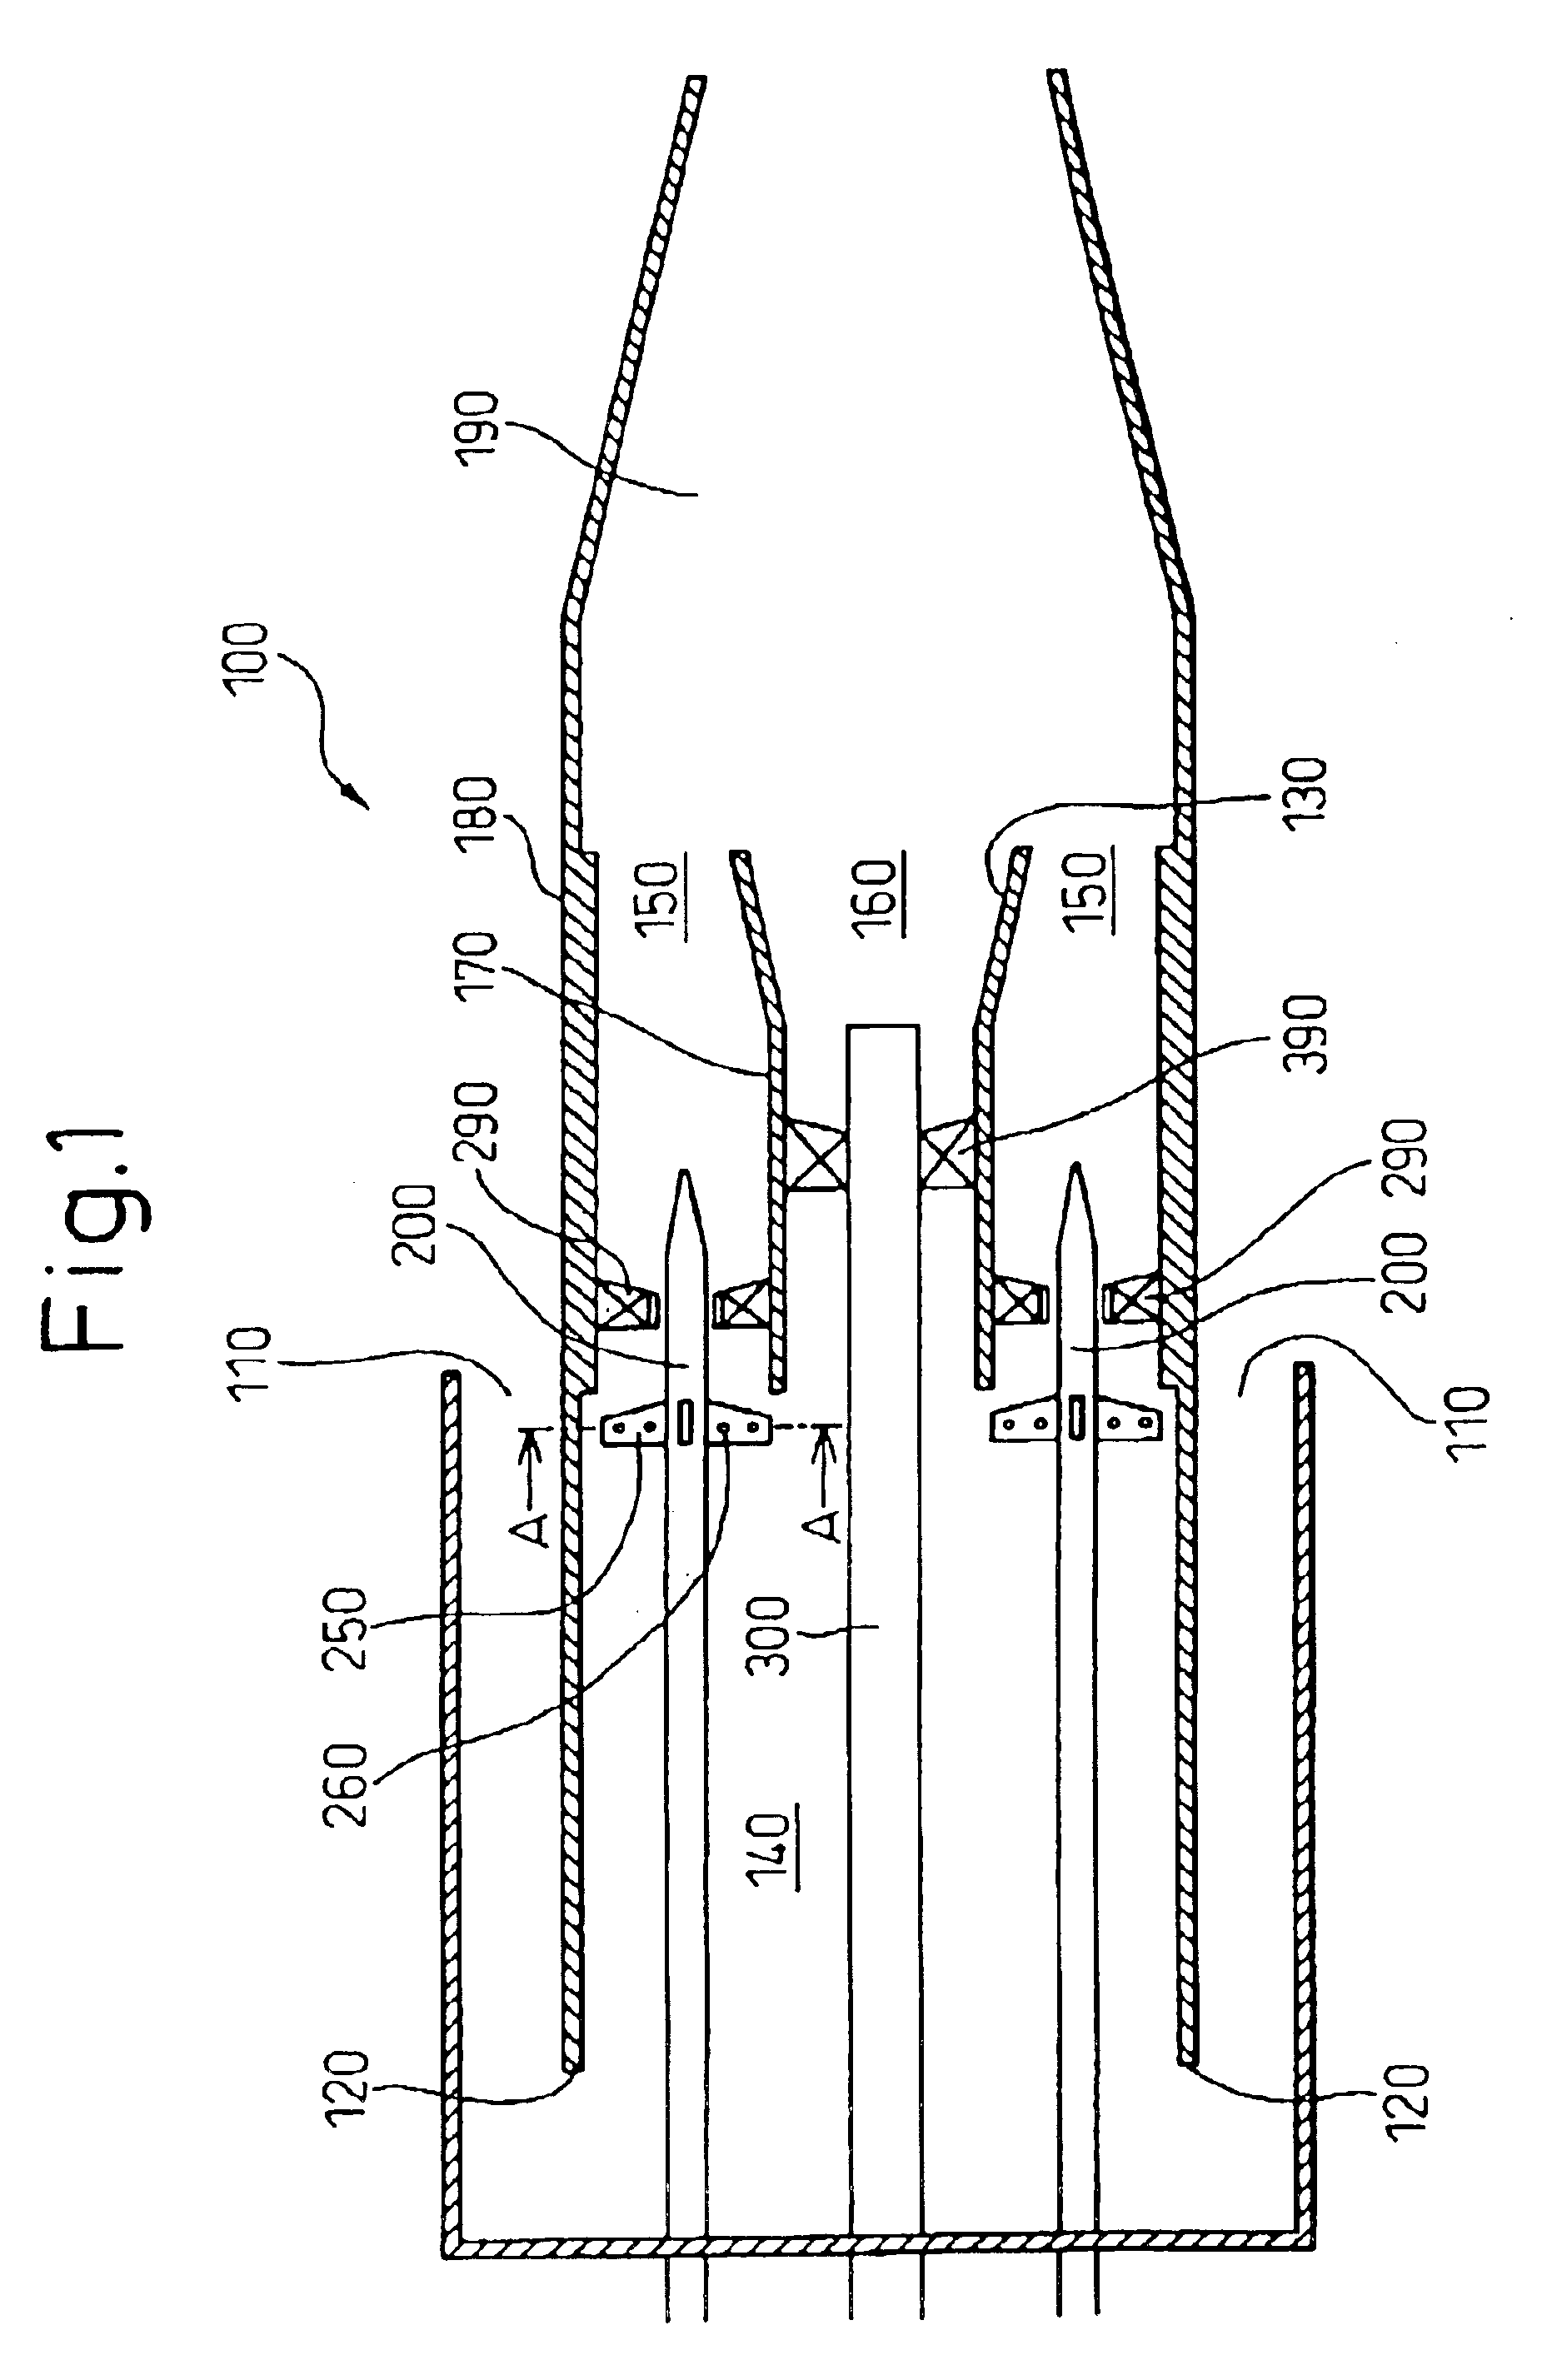 Combustor containing fuel nozzle